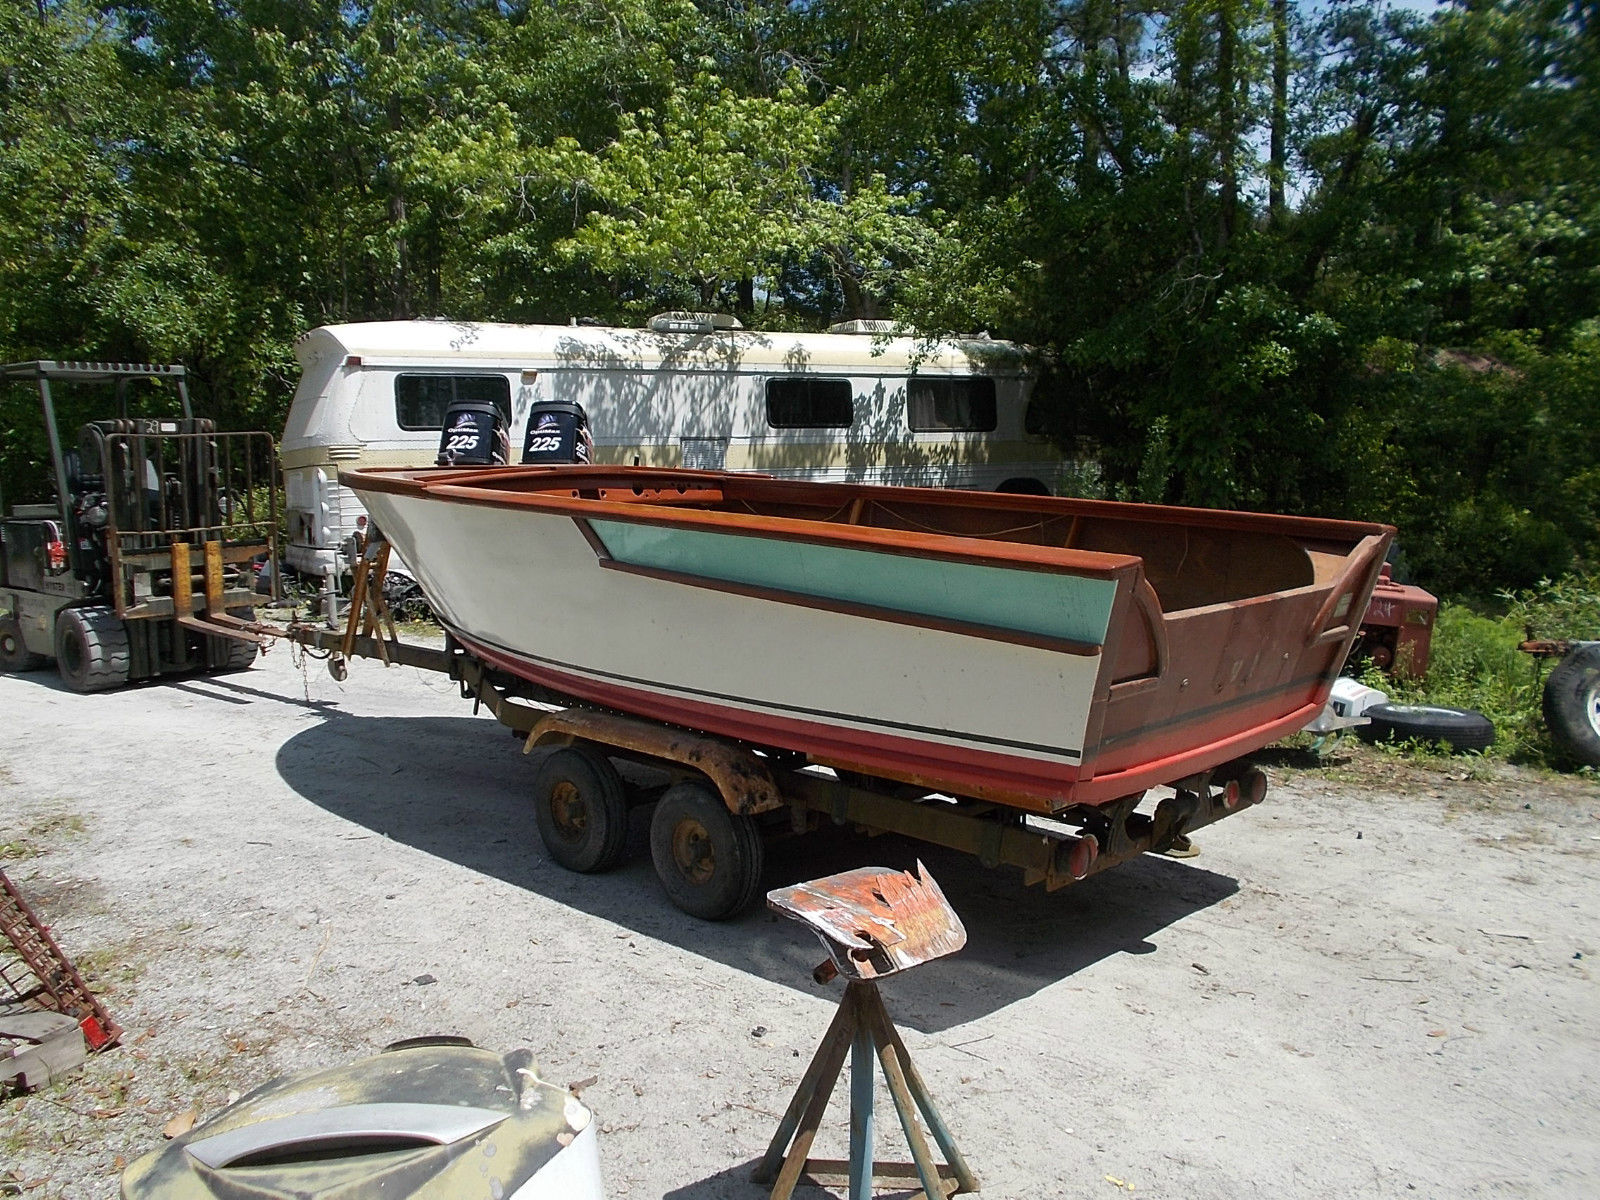 trojan seaqueen 1959 for sale for ,988 - boats-from-usa.com